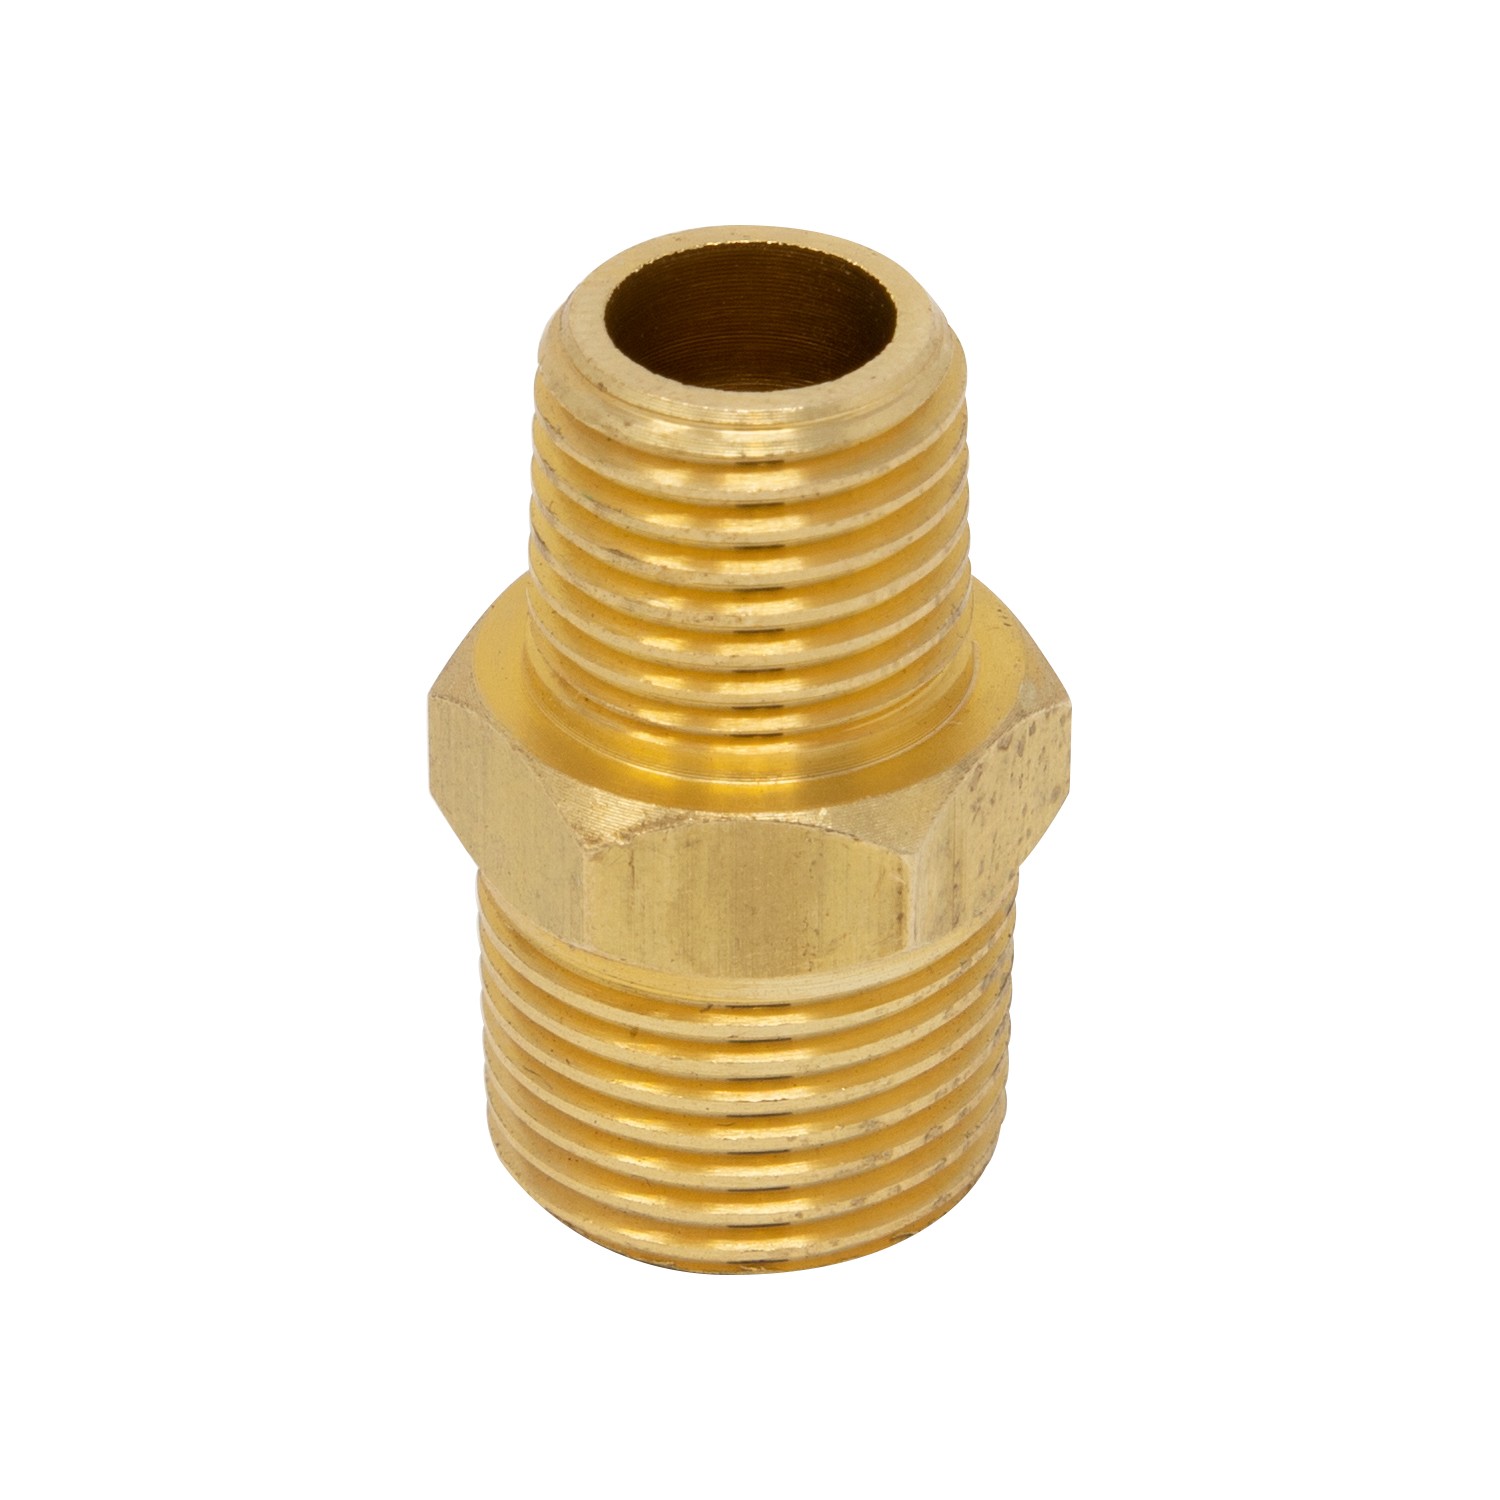 Male Pipe Reducer - 3/8" x 1/4"